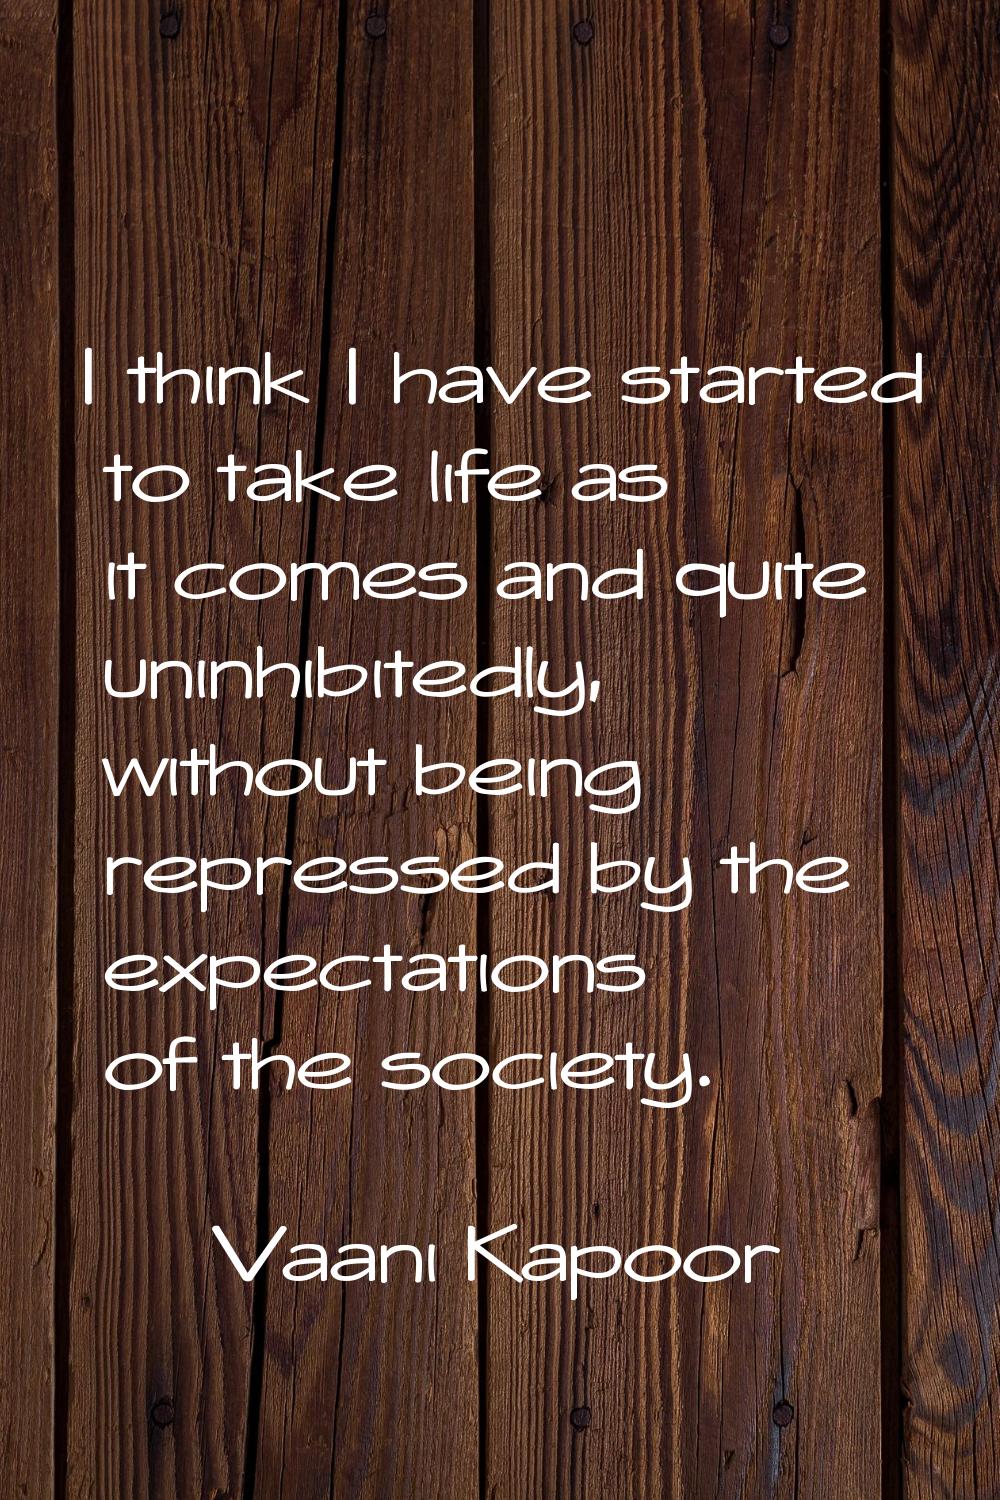 I think I have started to take life as it comes and quite uninhibitedly, without being repressed by